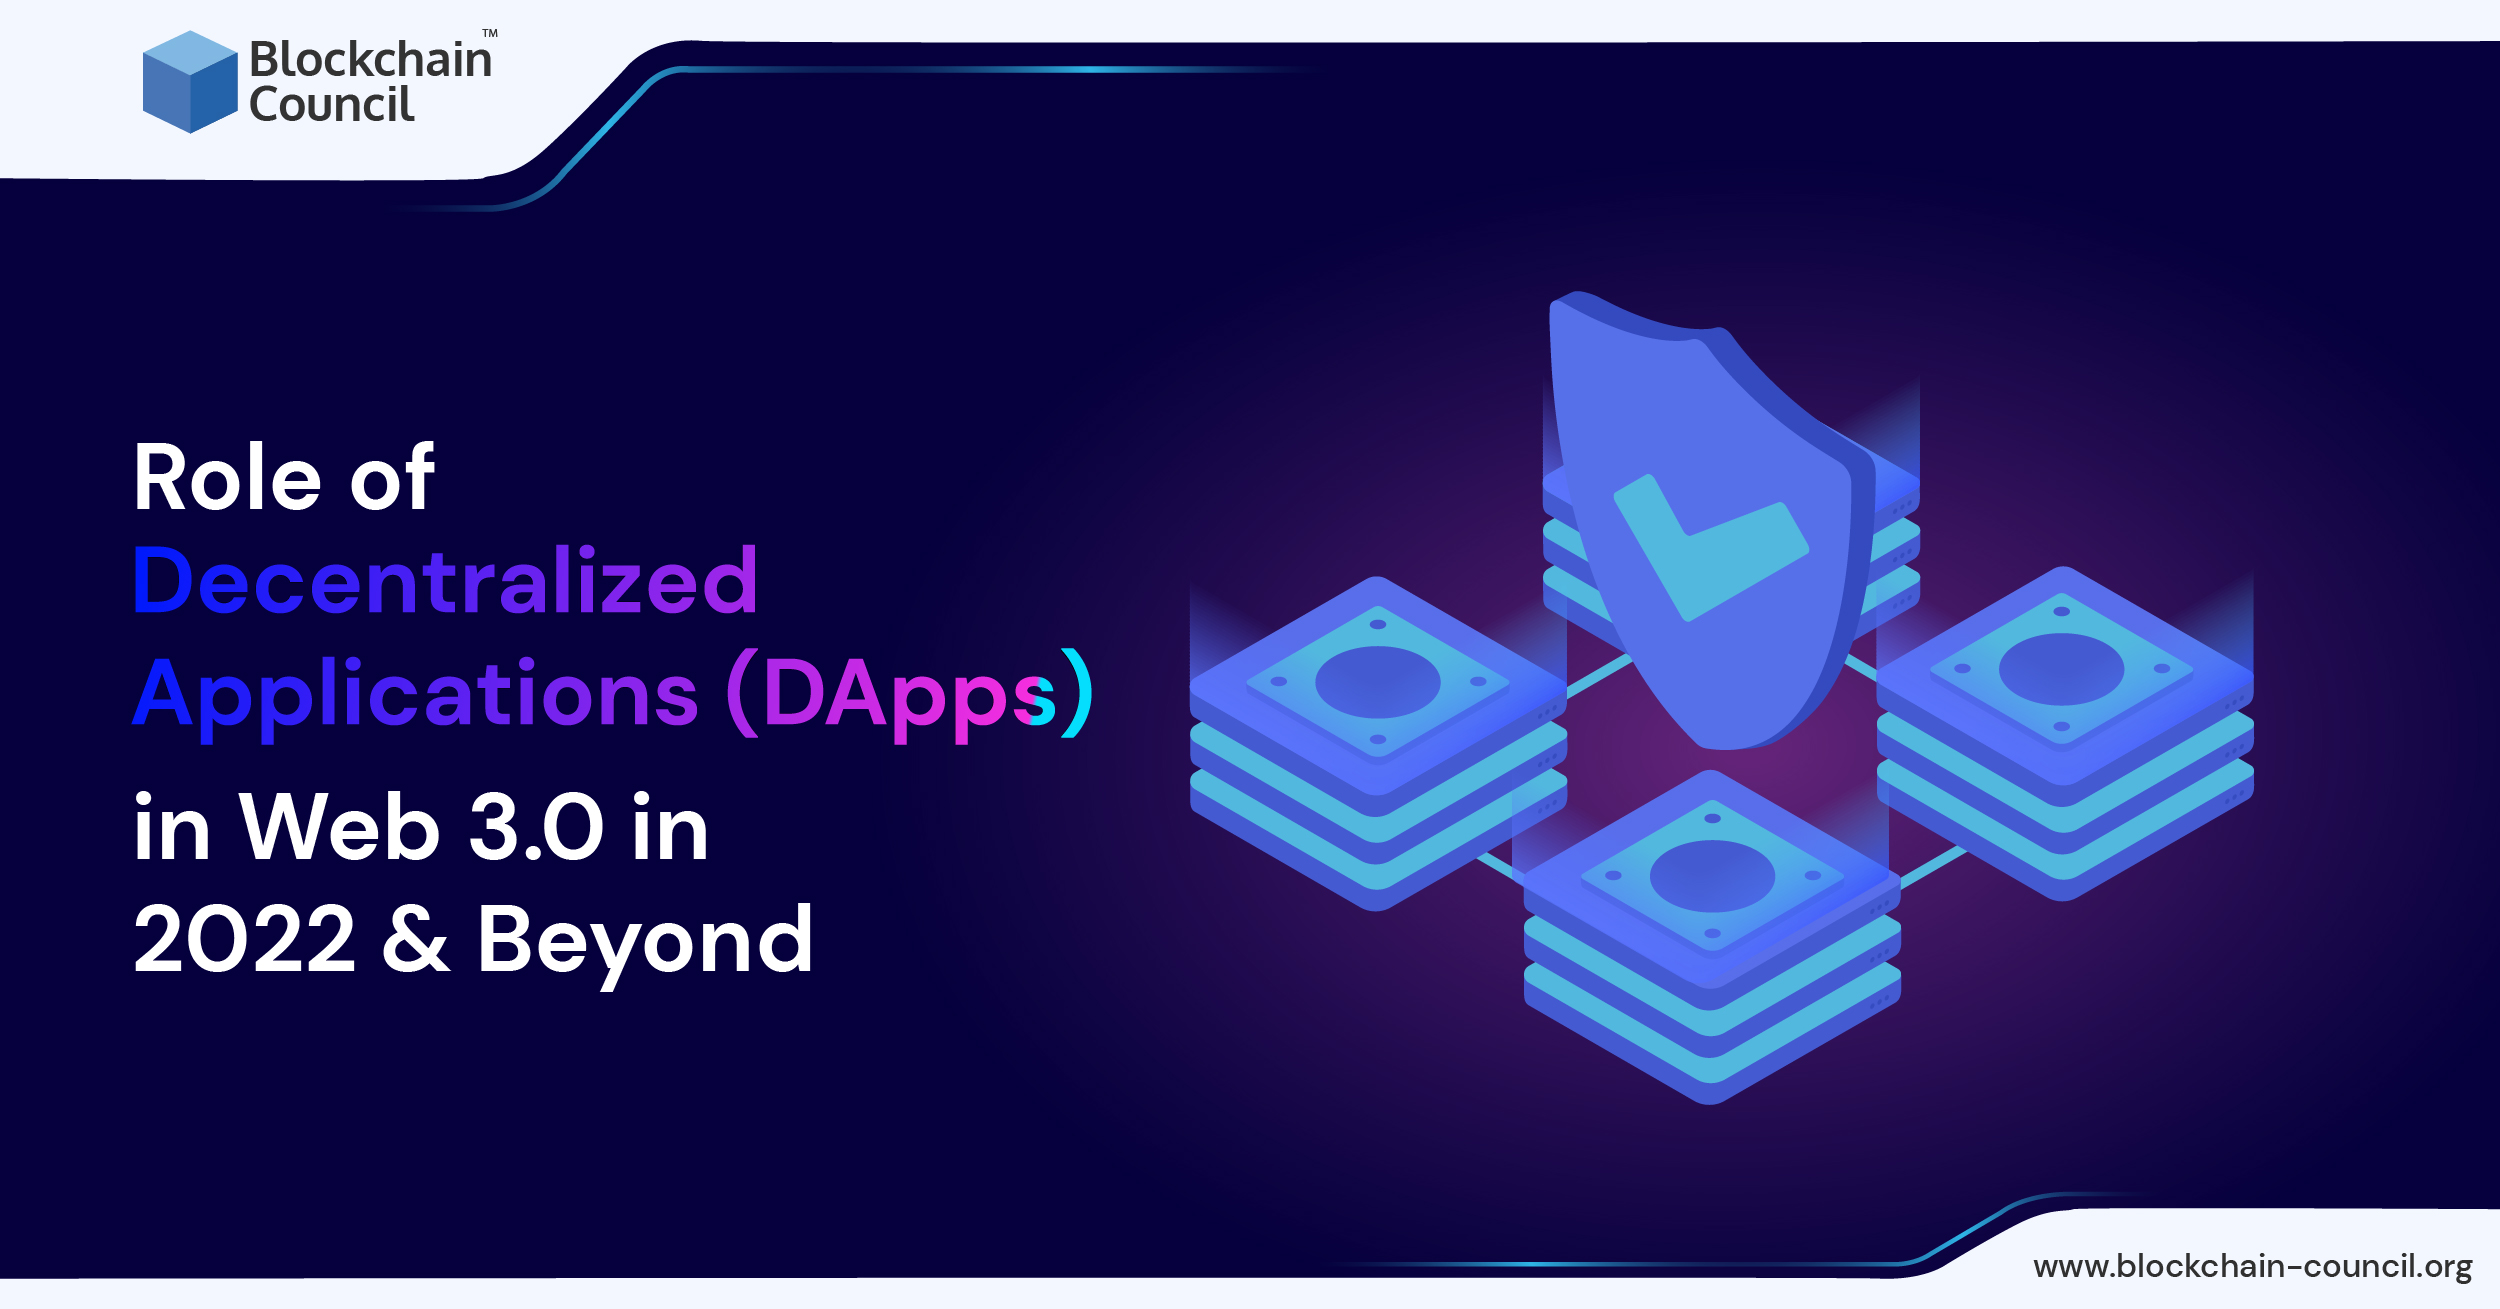 Role of Decentralized Applications (DApps) in Web 3.0 in 2022 & Beyond